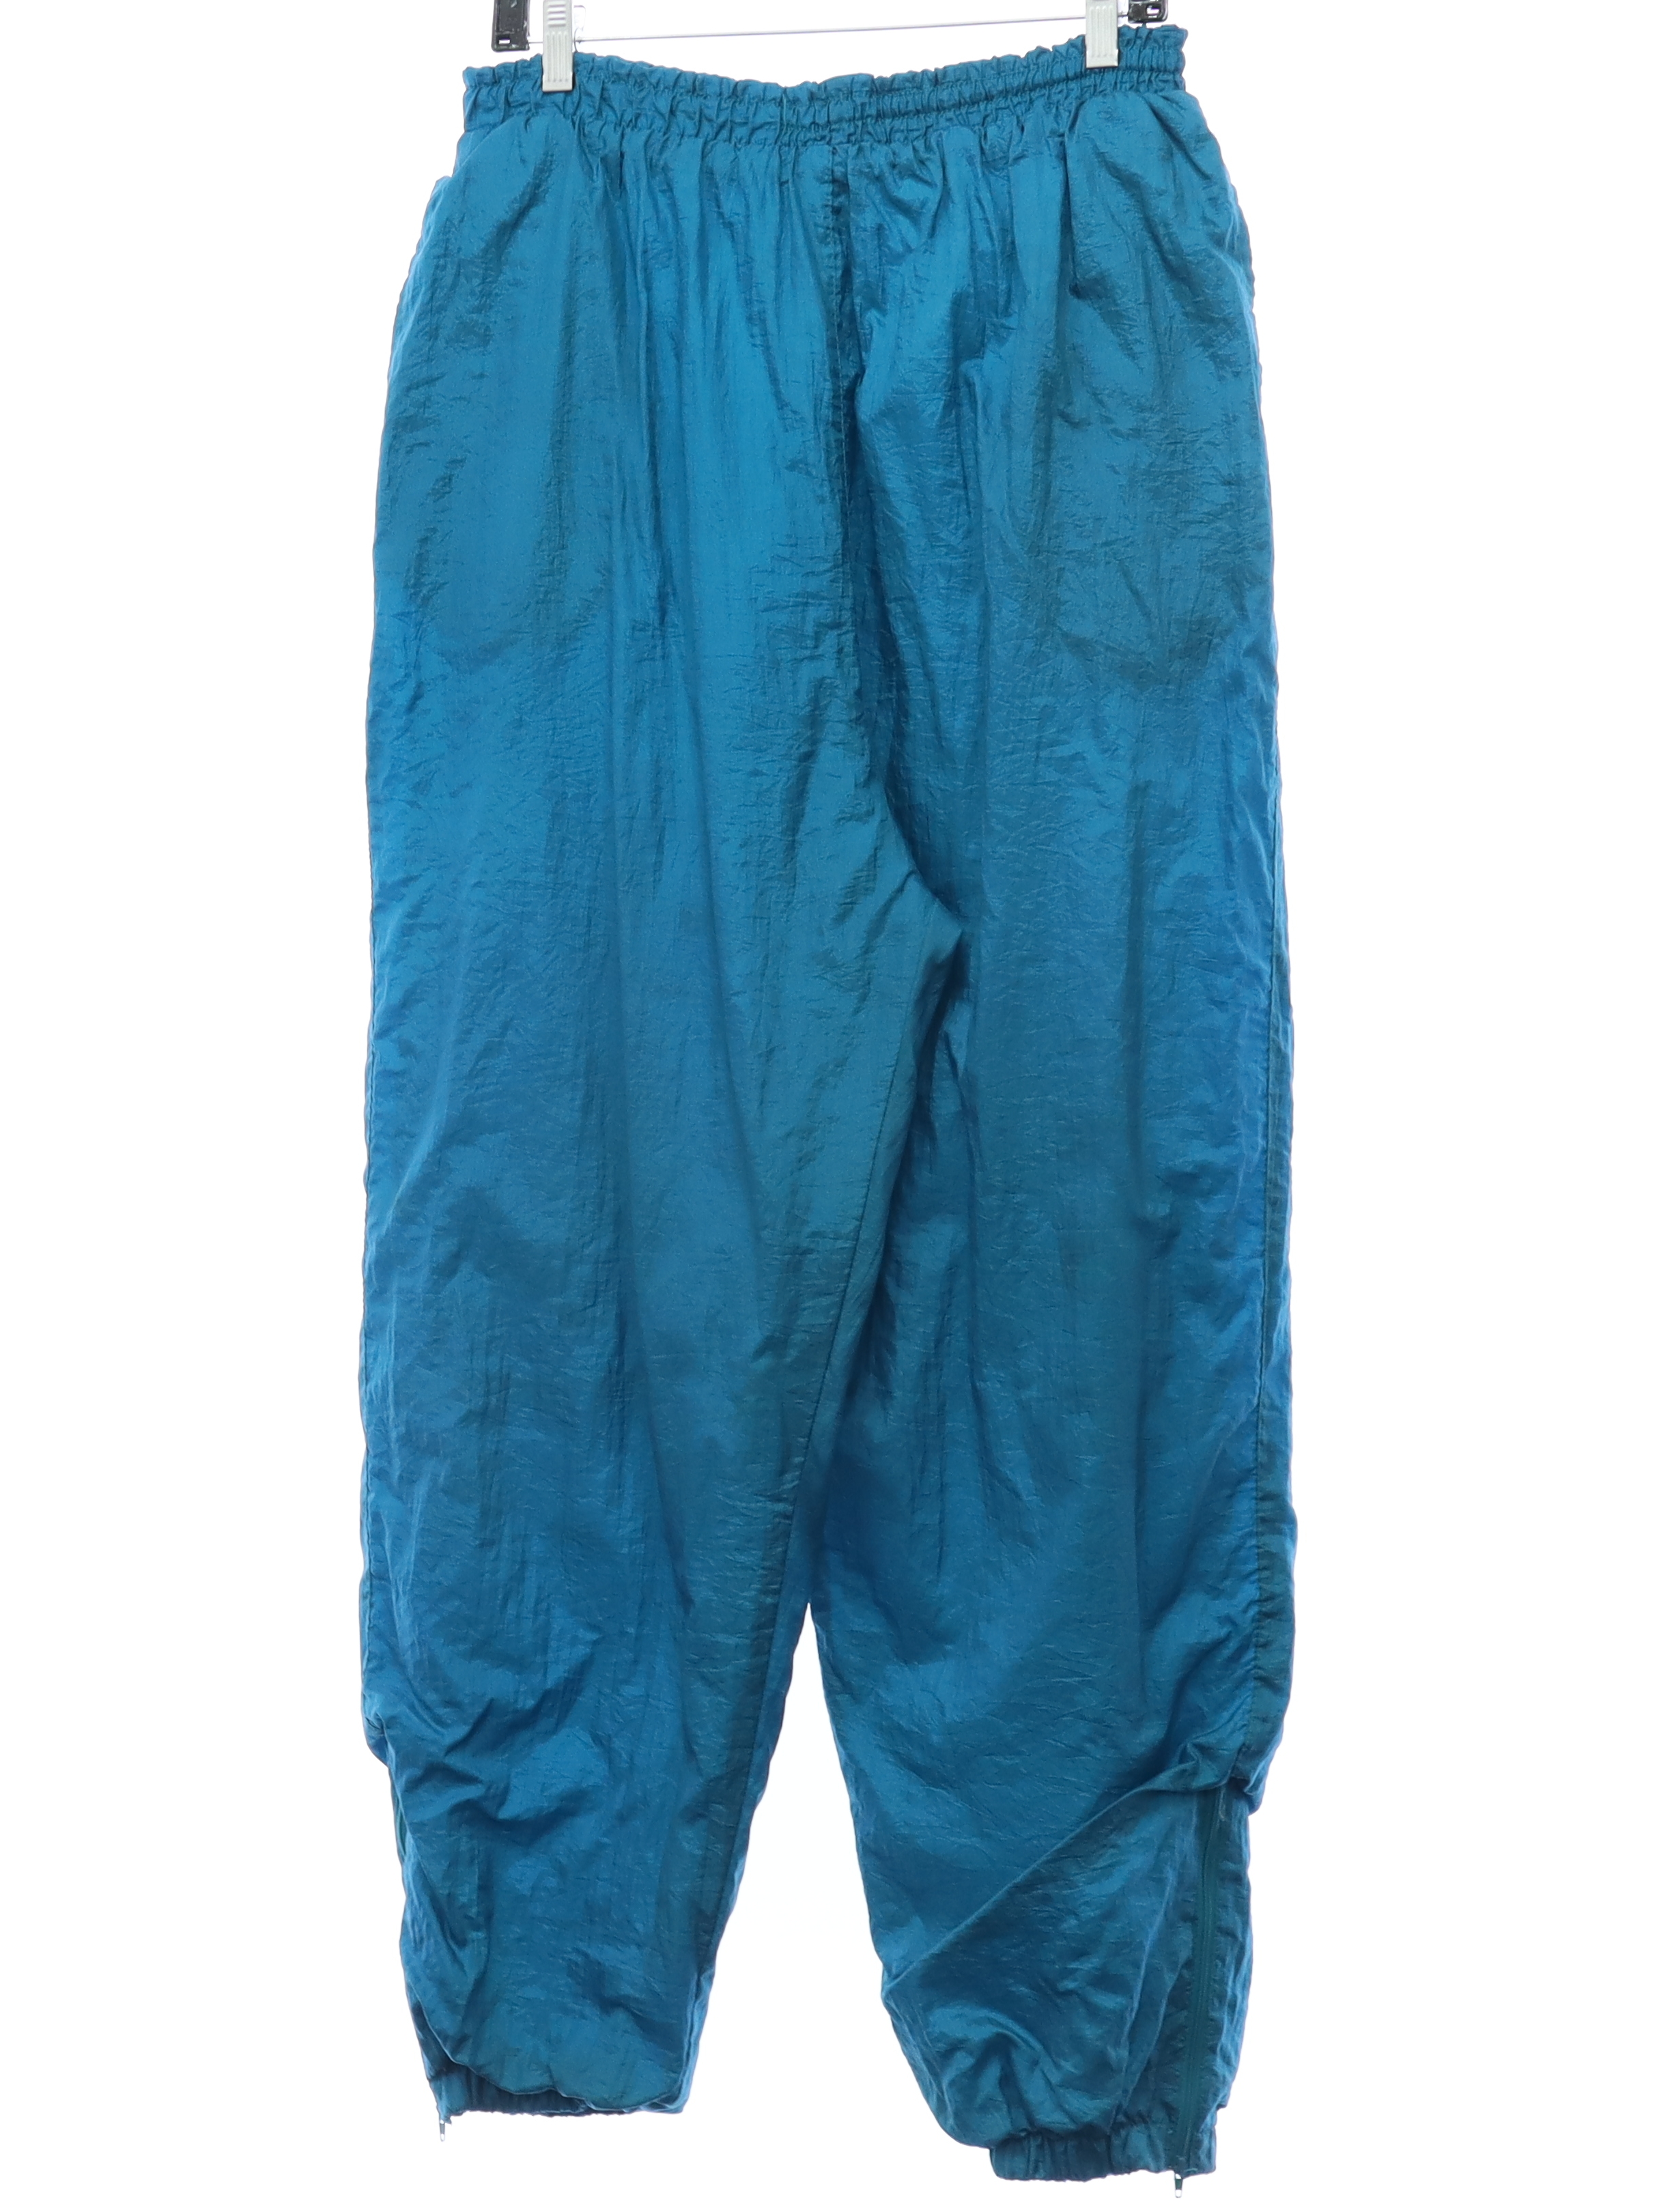 Vintage 80s 90s Men's Polyester Sweatpants with Elastic Waistband and  Pockets Ideal for Active Wear